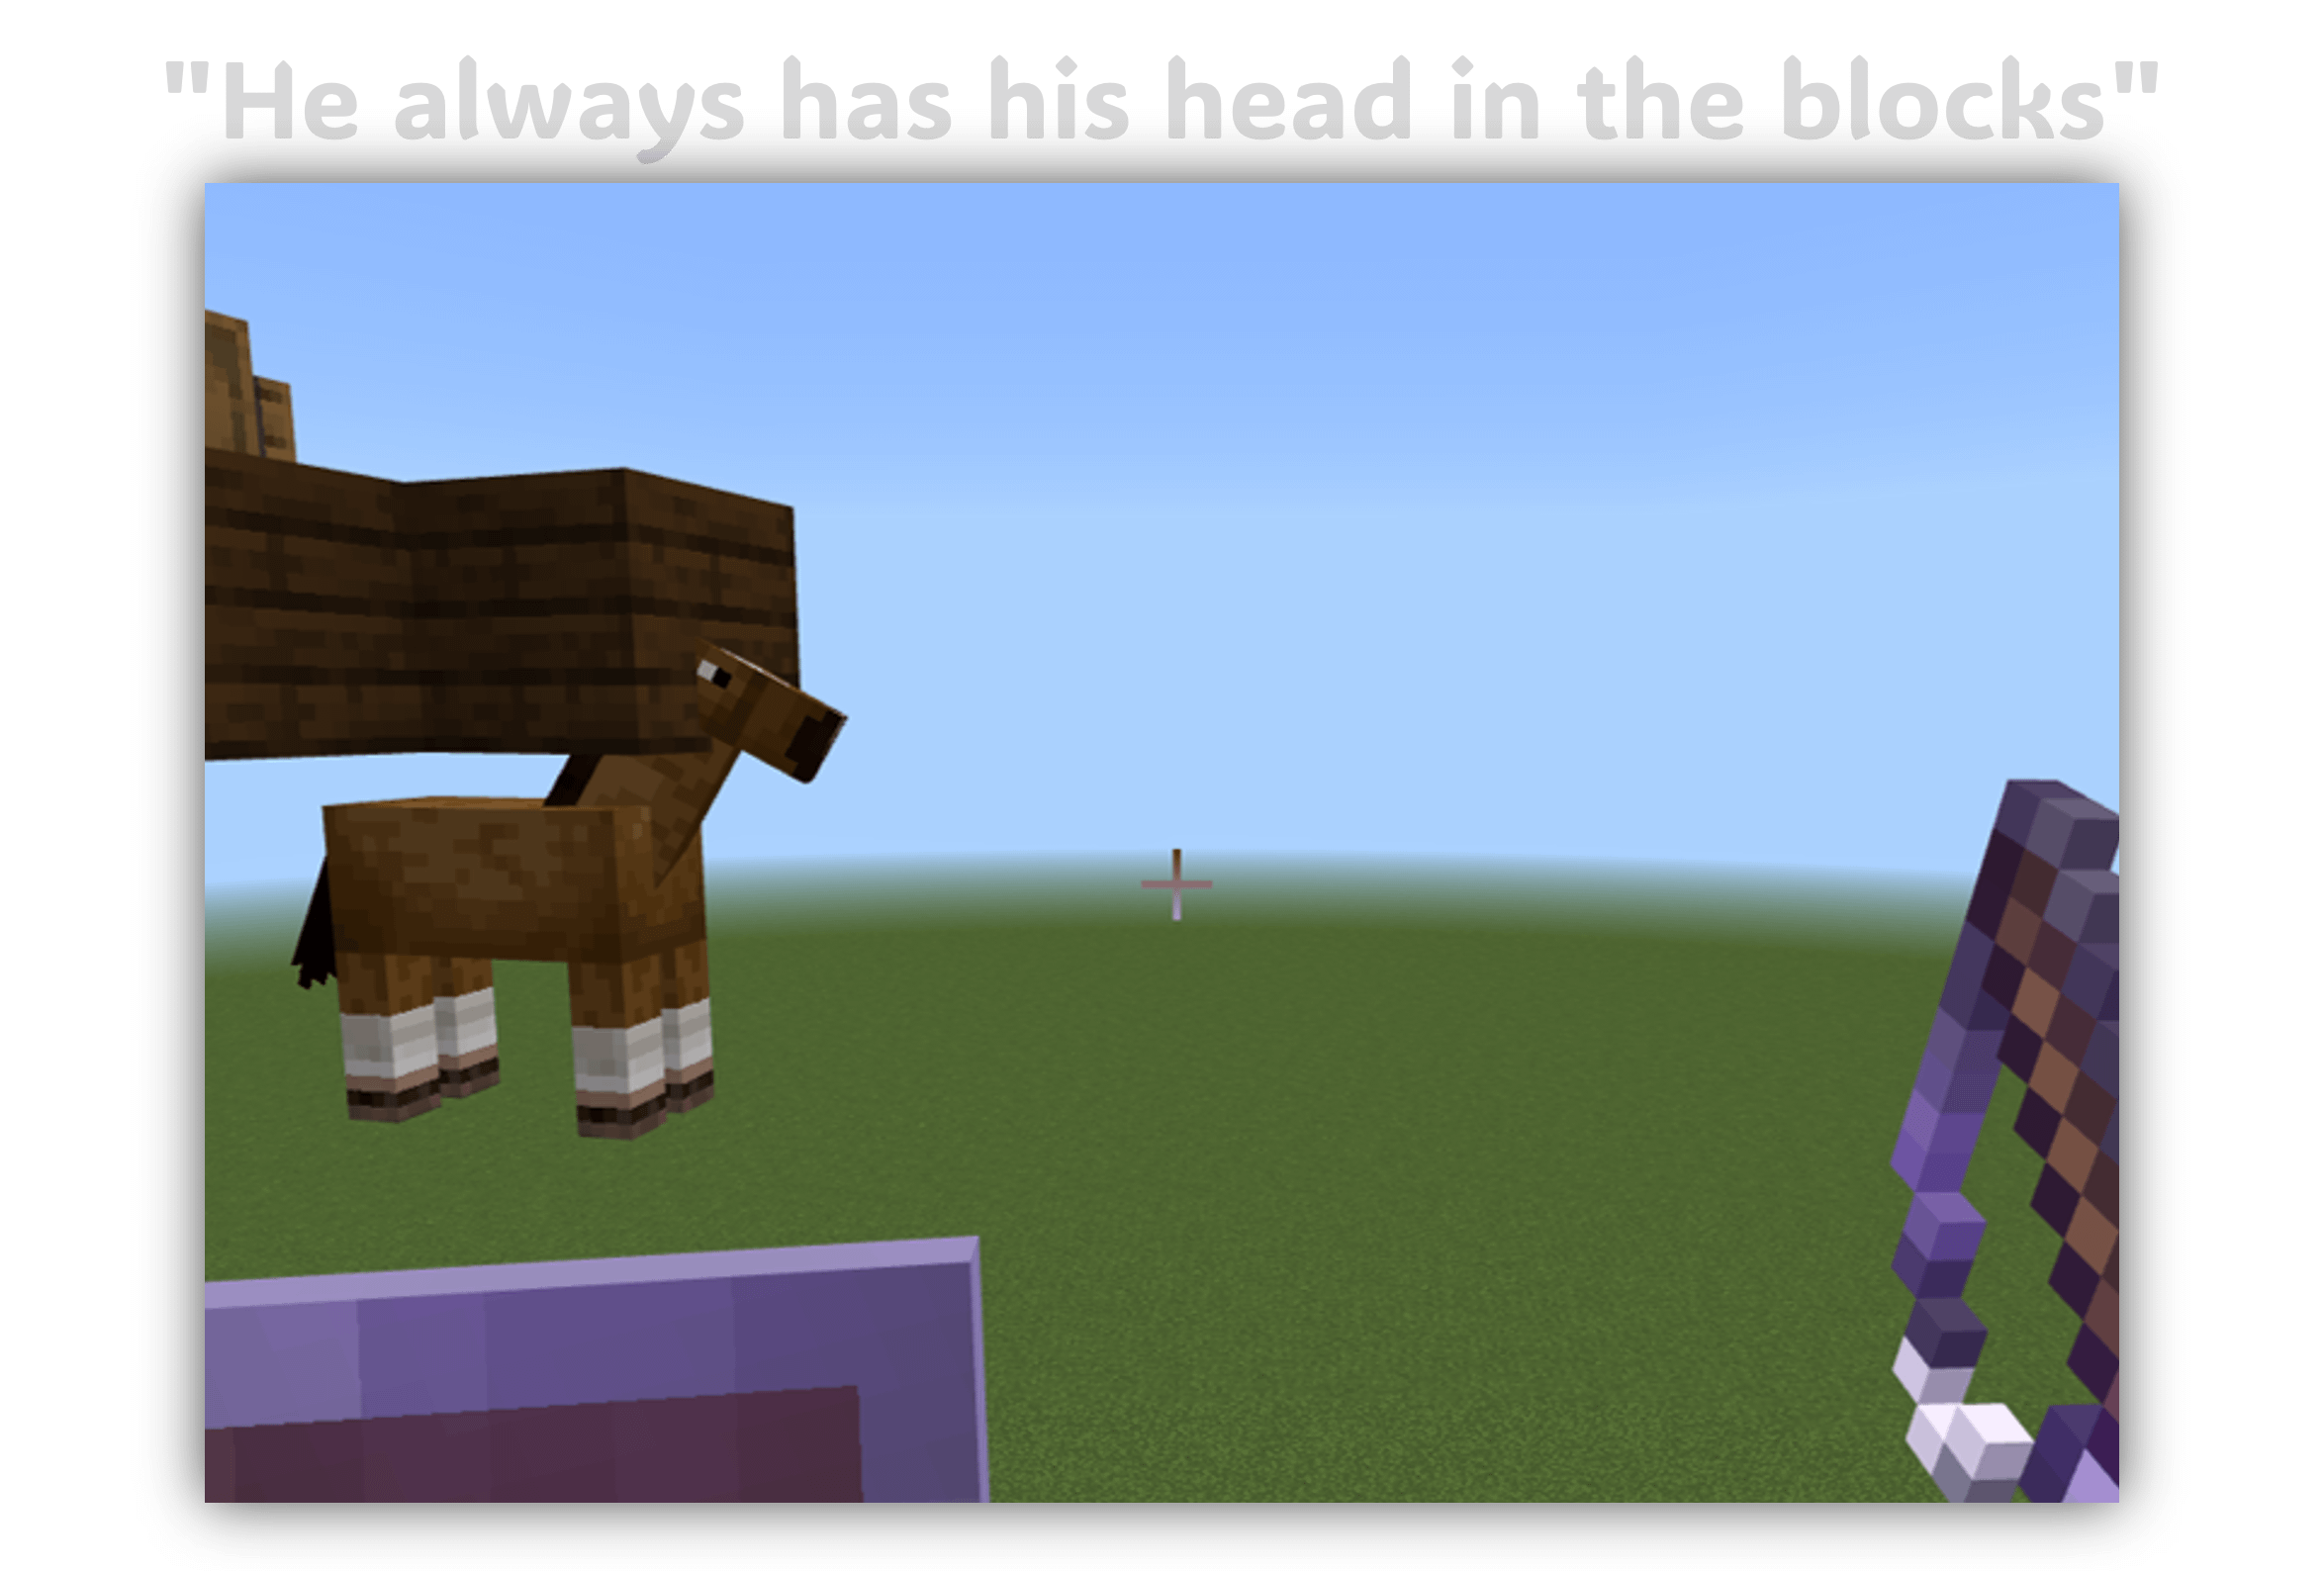 Minecraft Memes - "Minecraft player is a sky lover"